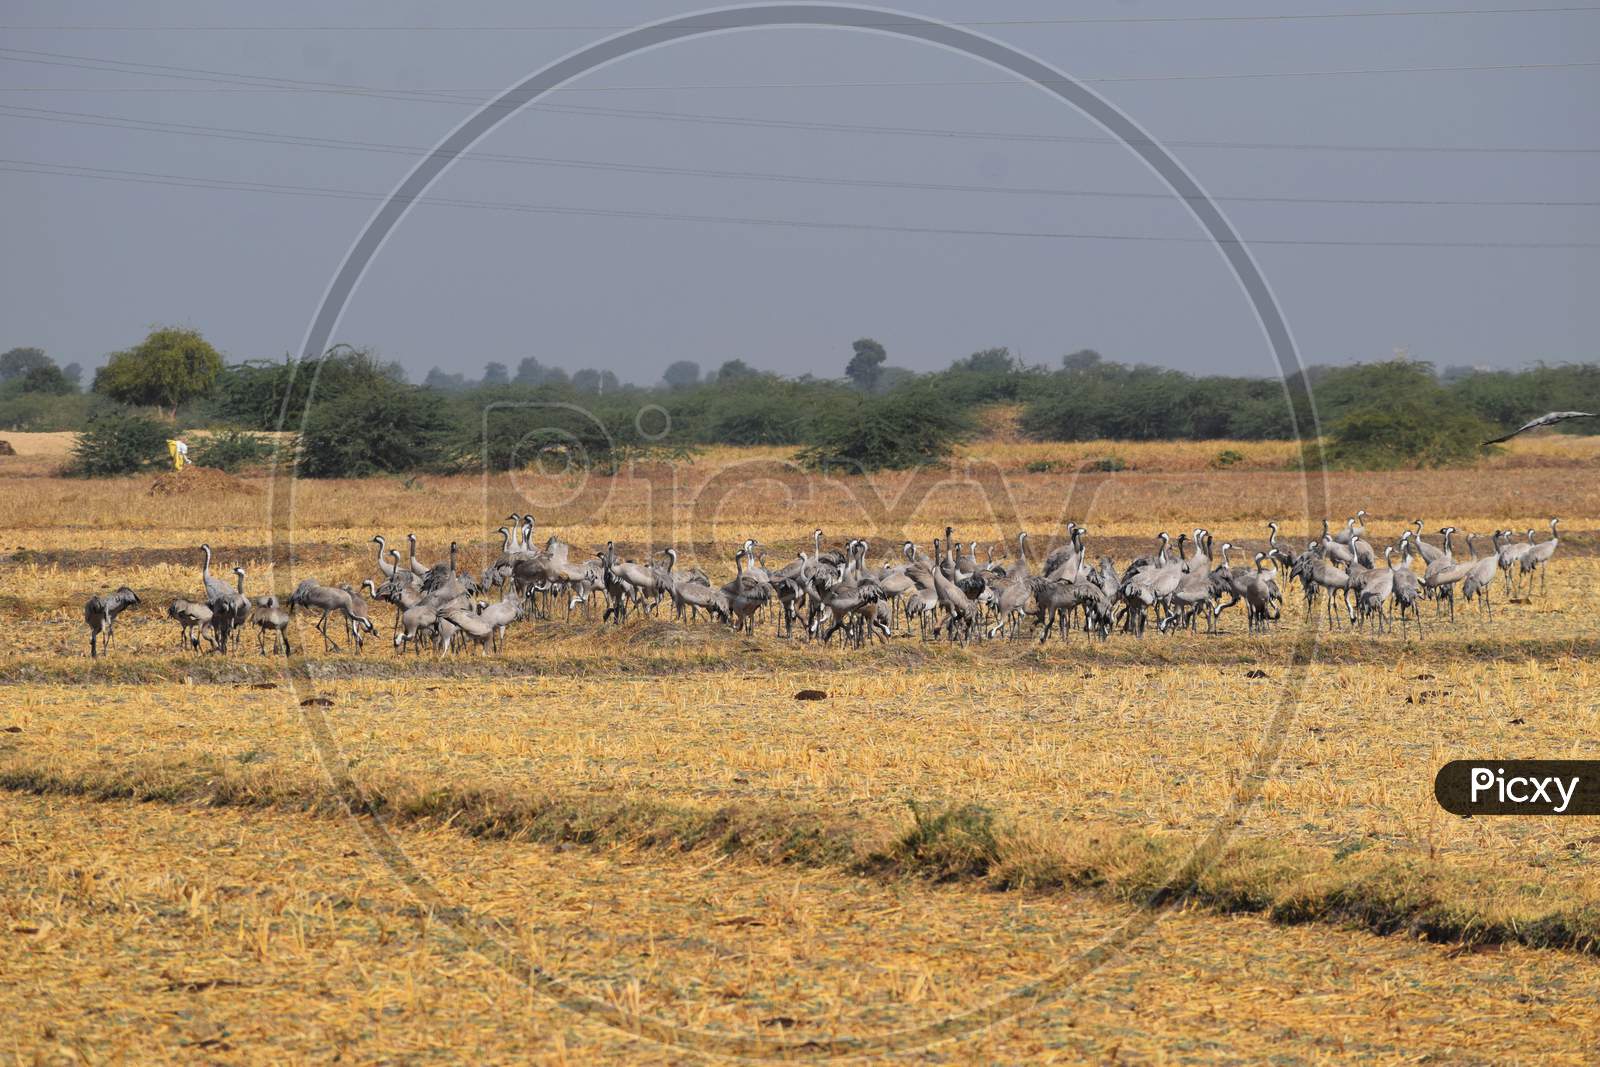 Flock Of Common Cranes Also Known As Eurasian Crane (Grus Grus) Gathered In Big Groups In Desert Of Rann Of Kutch Gujarat, India.